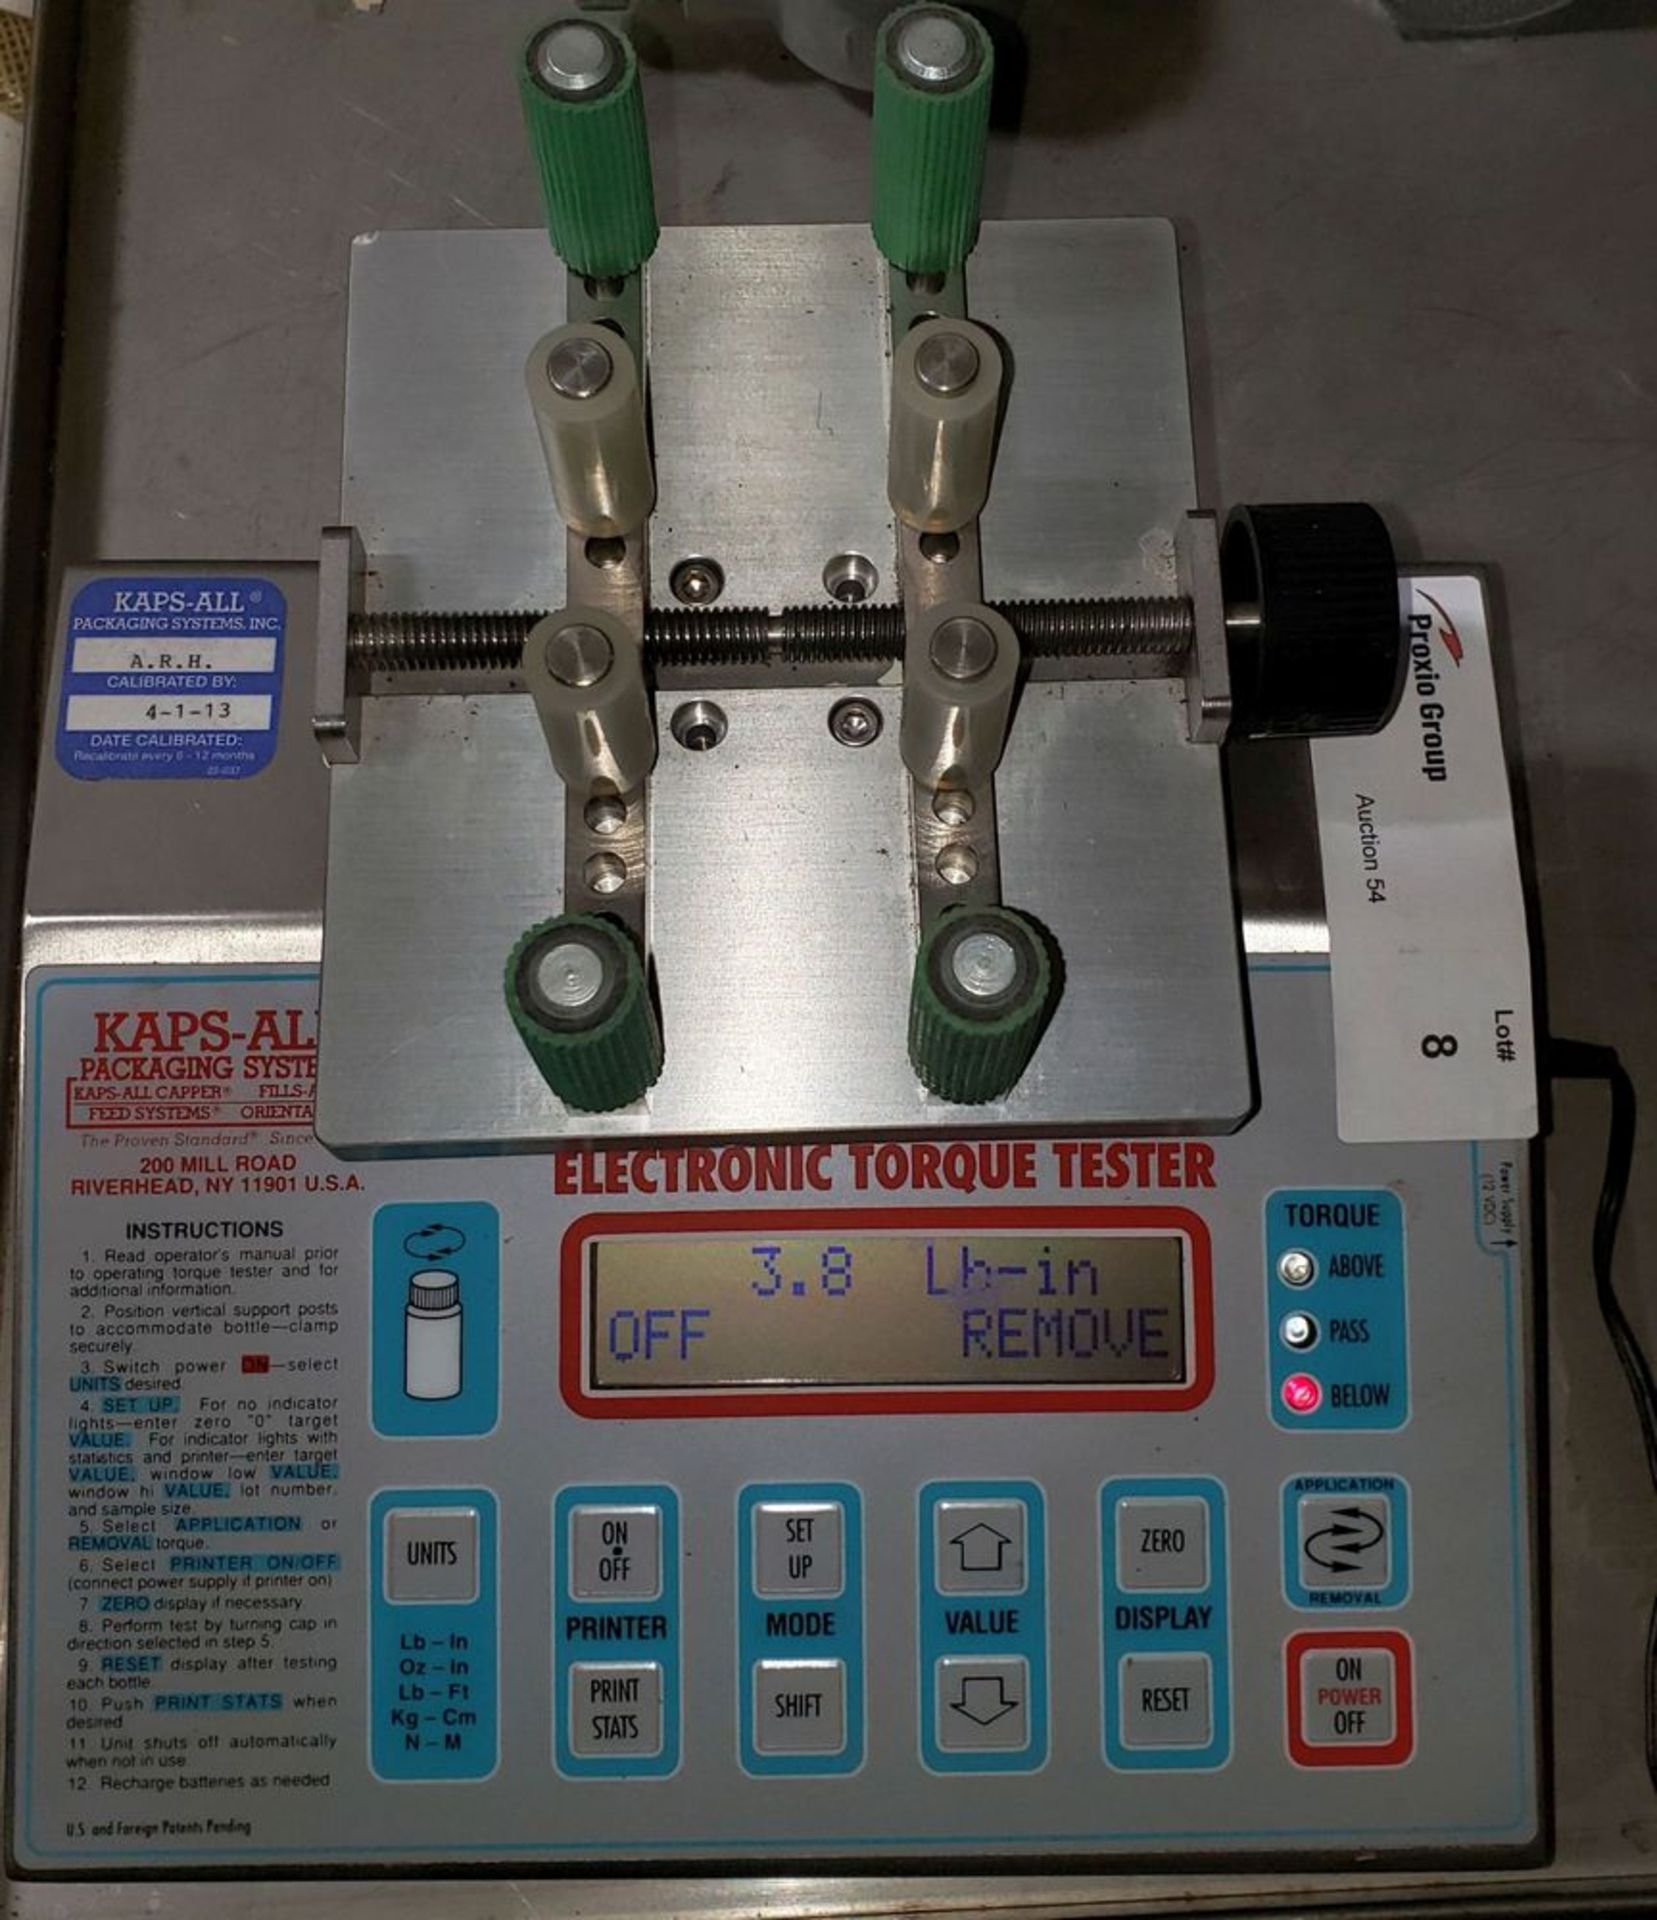 Kaps-All Electronic Torque Tester, model EB500, with power supply